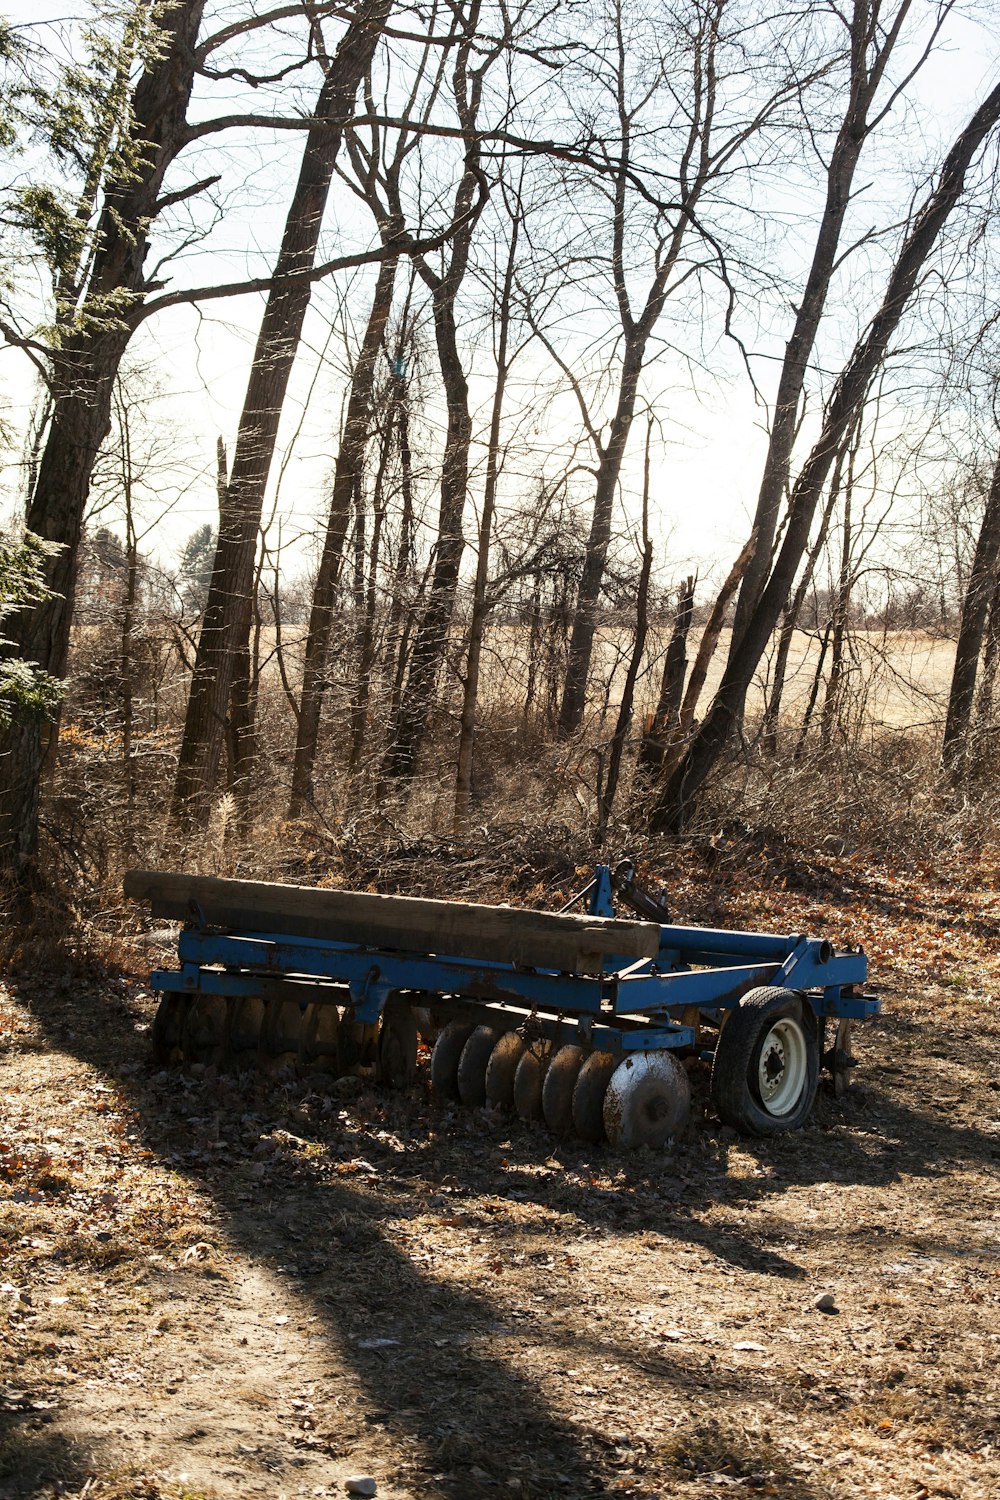 a plow is parked in the middle of a wooded area